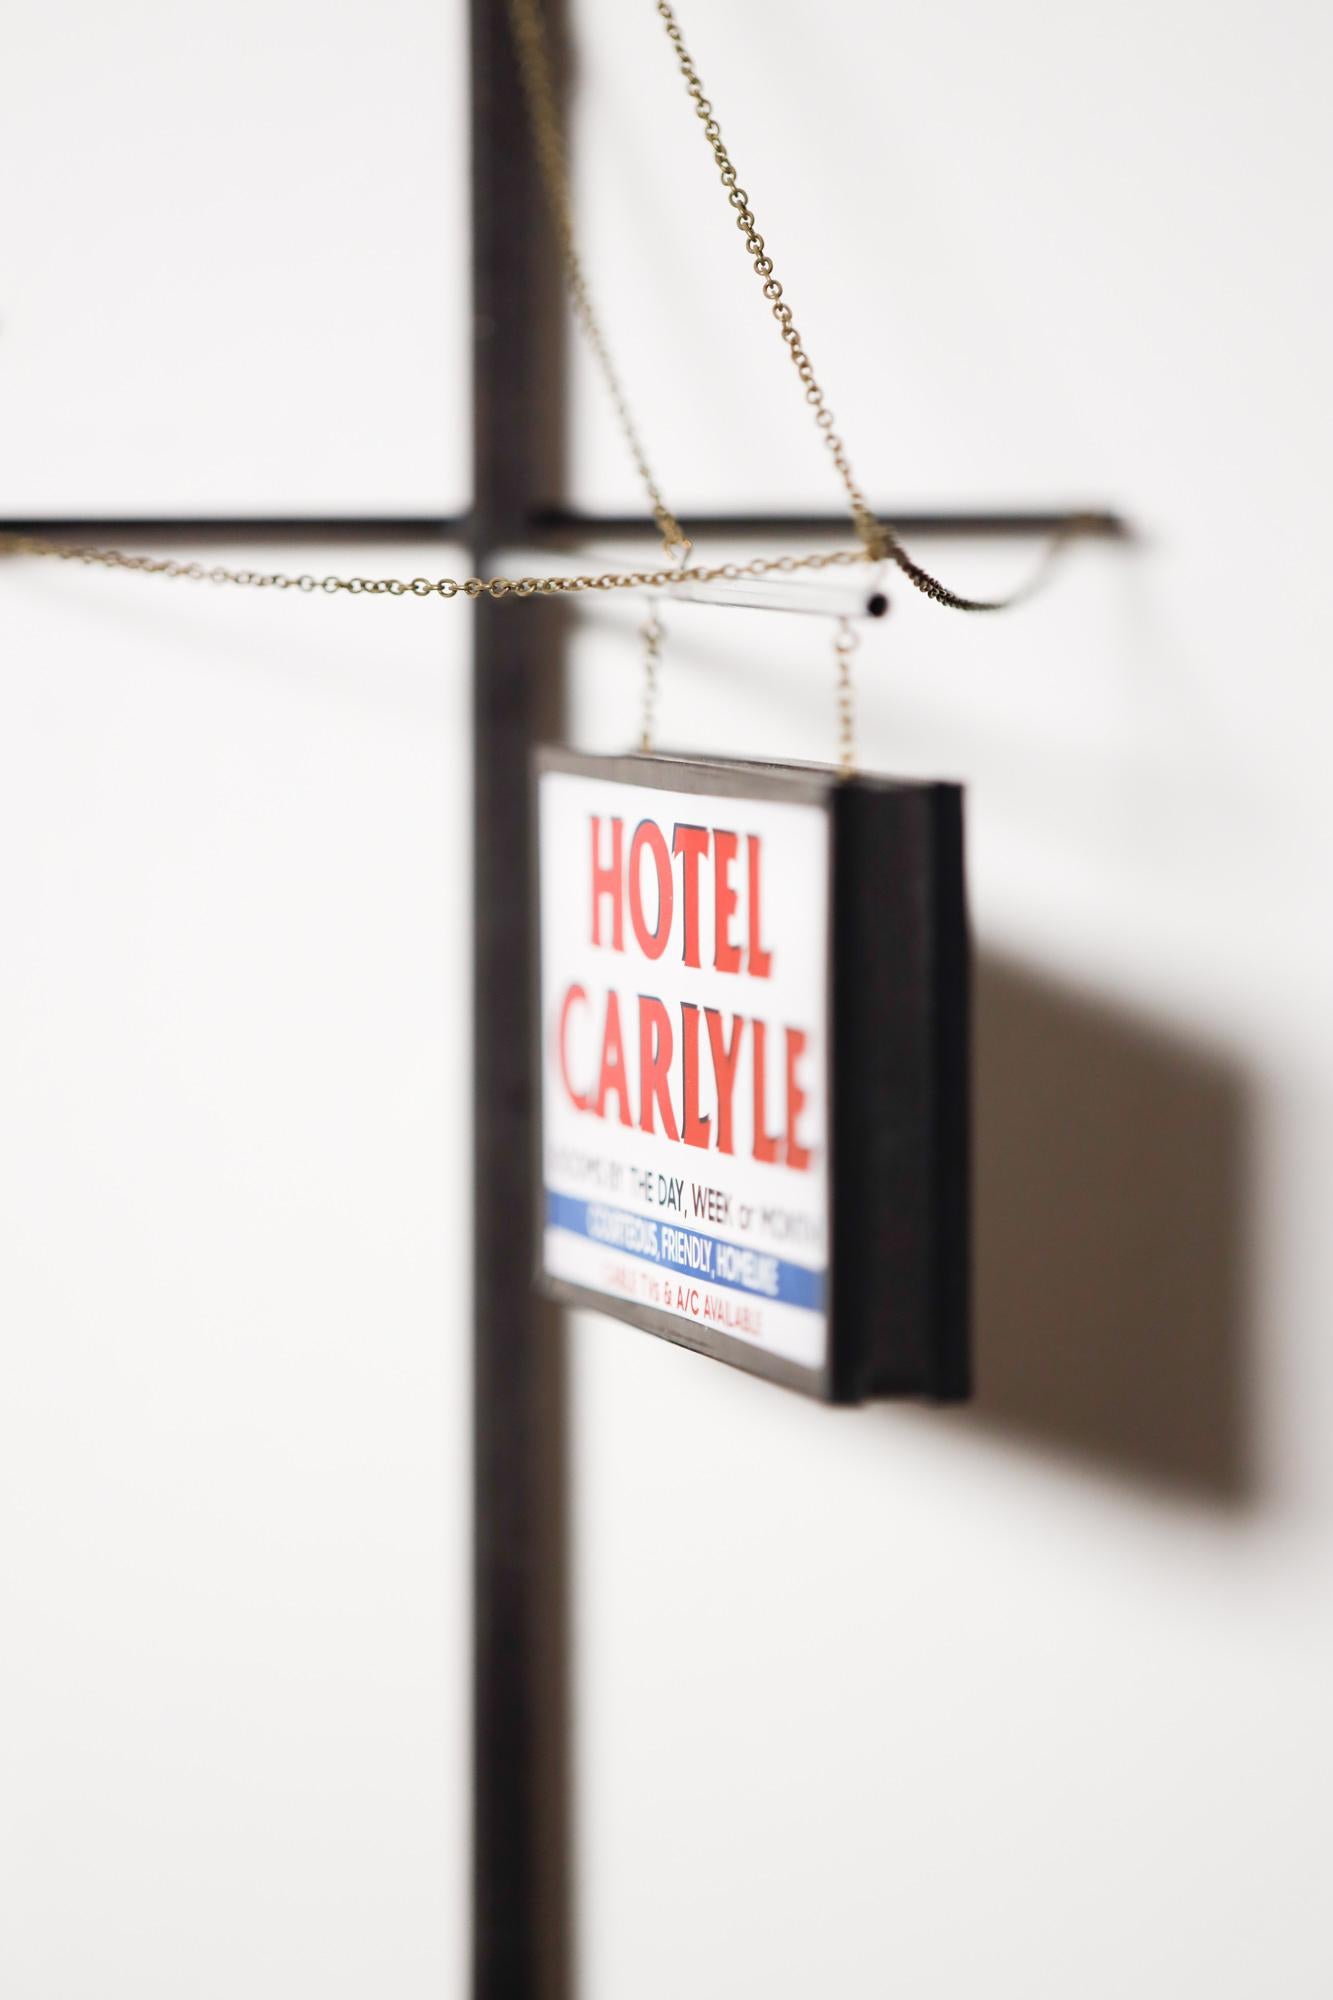 Hotel Carlyle 2